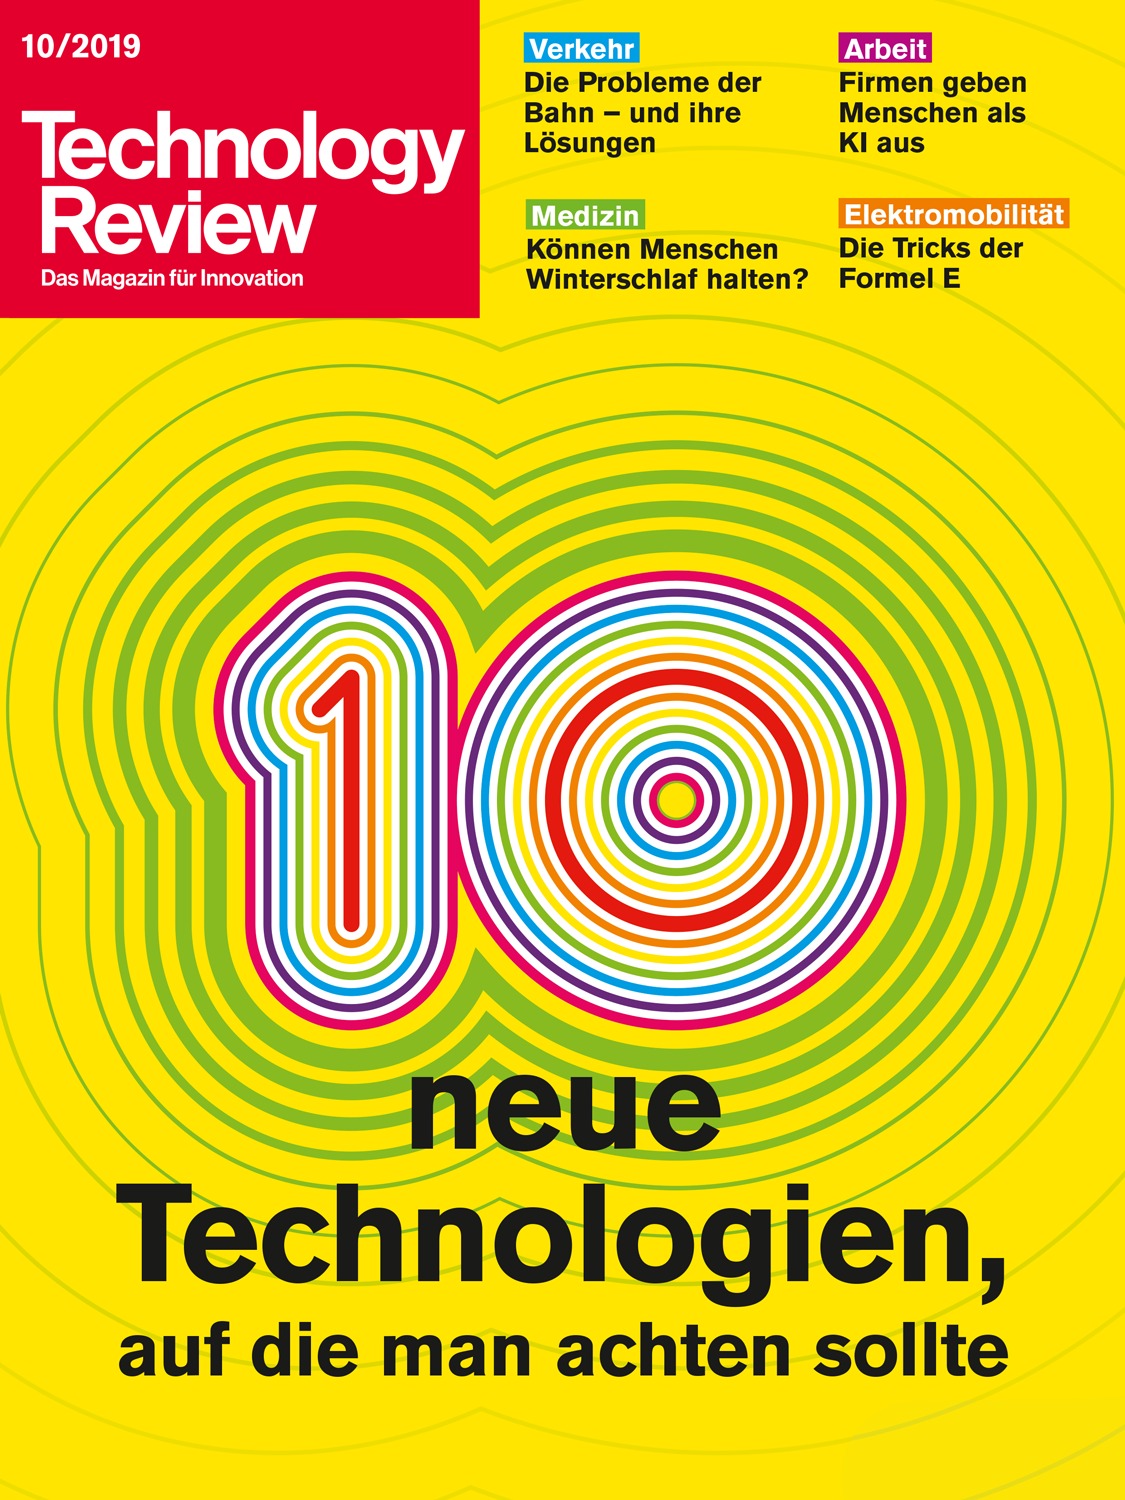 Technology Review 10/2019